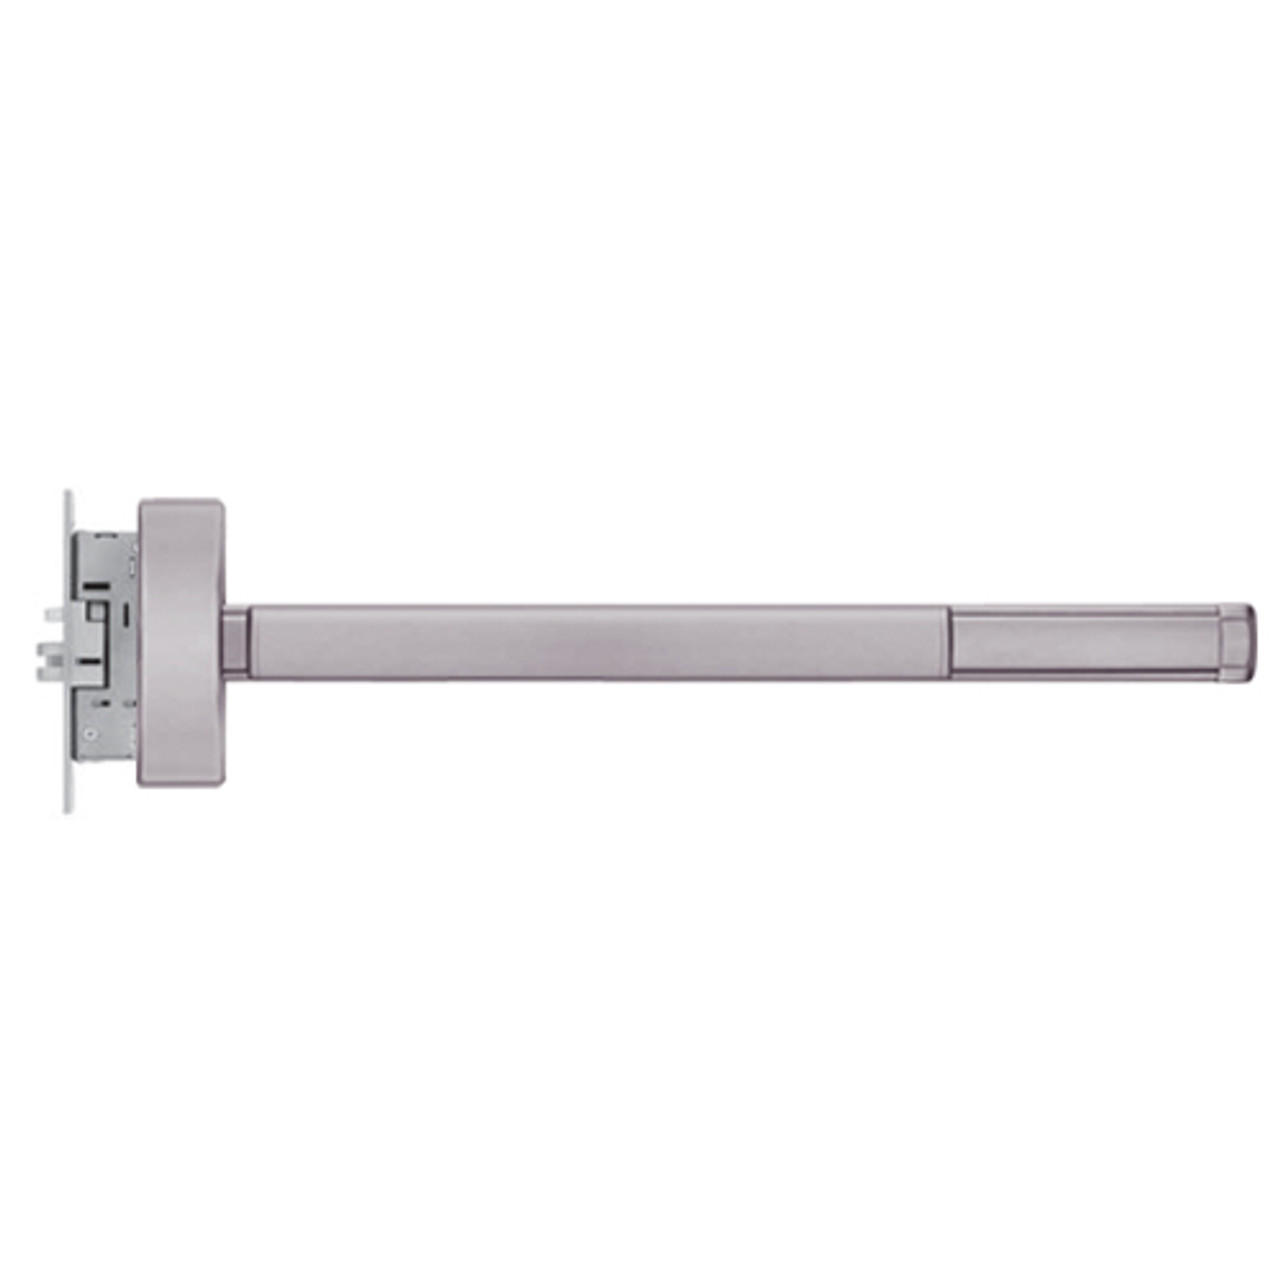 TS2302-RHR-630-36 PHI 2300 Series Apex Mortise Exit Device with Touchbar Monitoring Switch Prepped for Dummy Trim in Satin Stainless Steel Finish